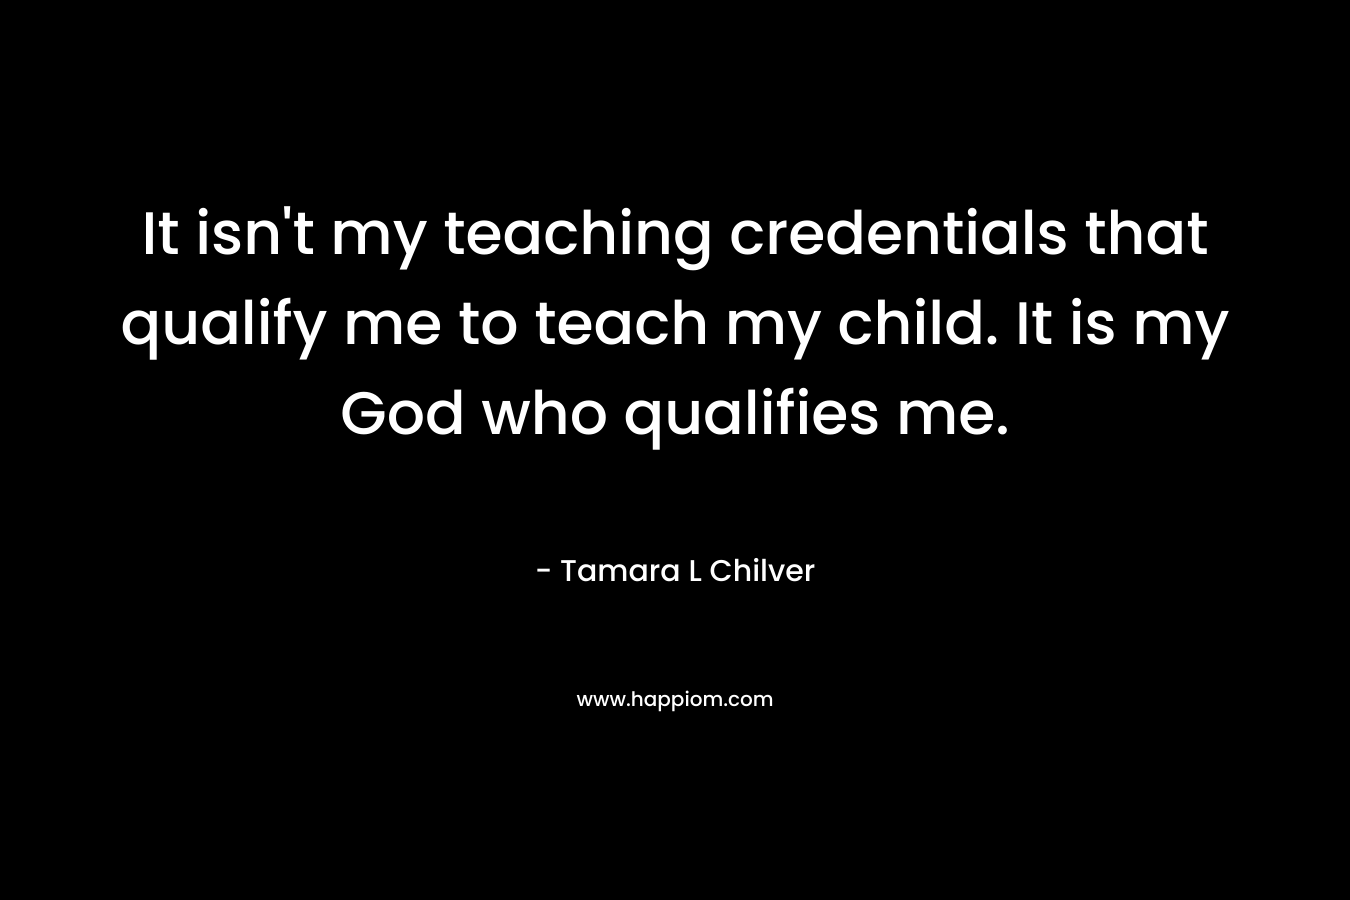 It isn’t my teaching credentials that qualify me to teach my child. It is my God who qualifies me. – Tamara L Chilver